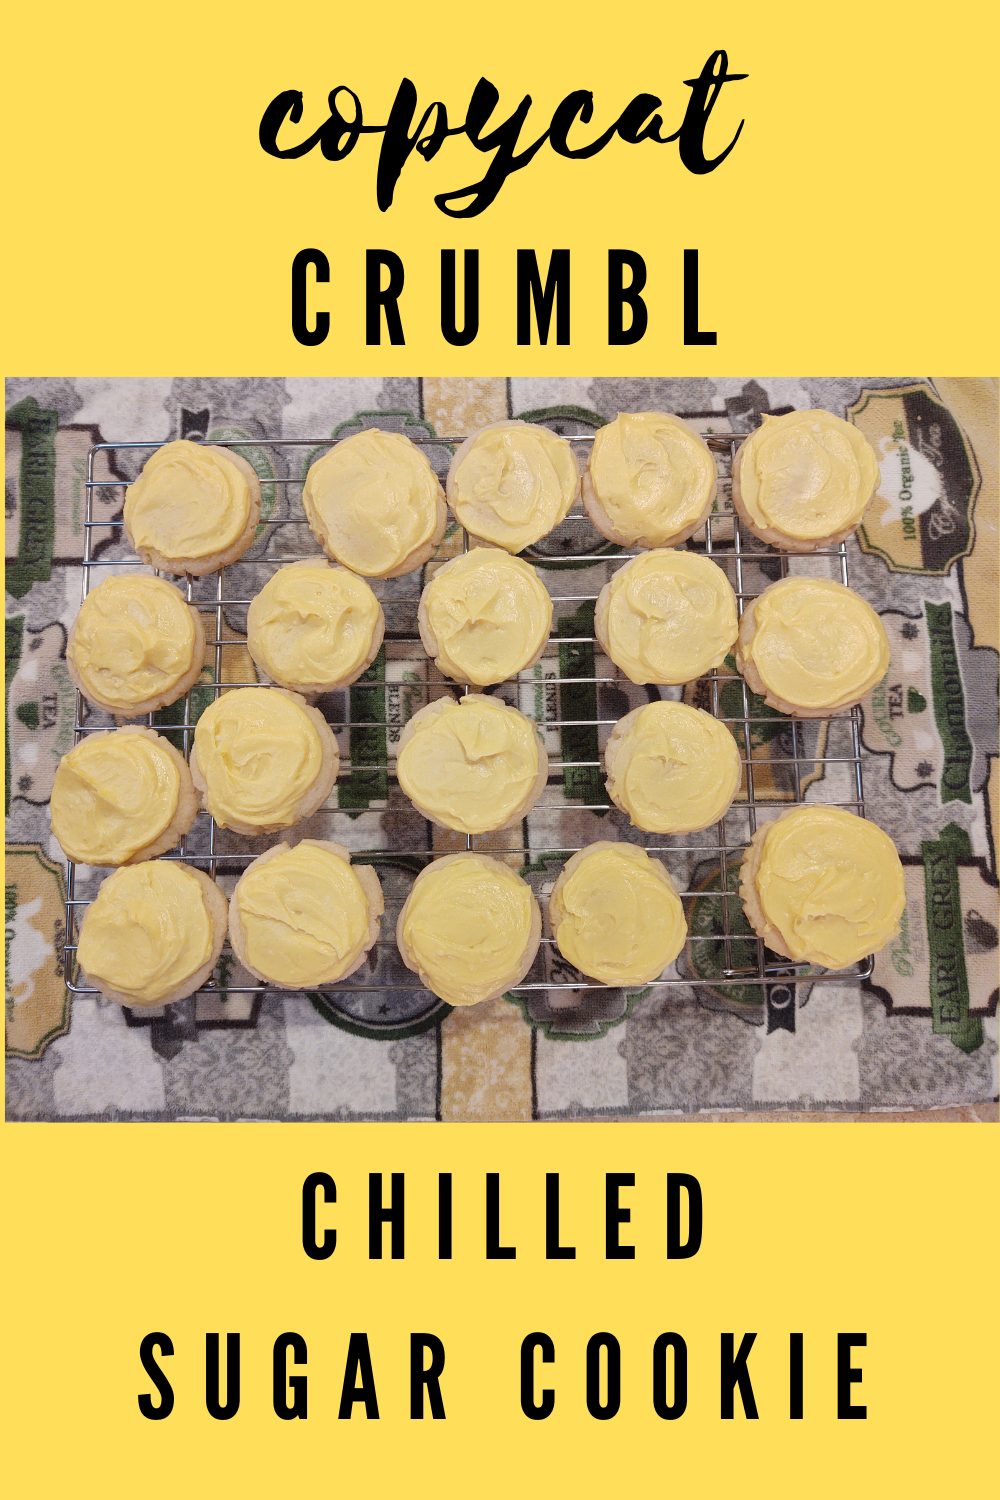 copycat crumbl chilled sugar cookie pin